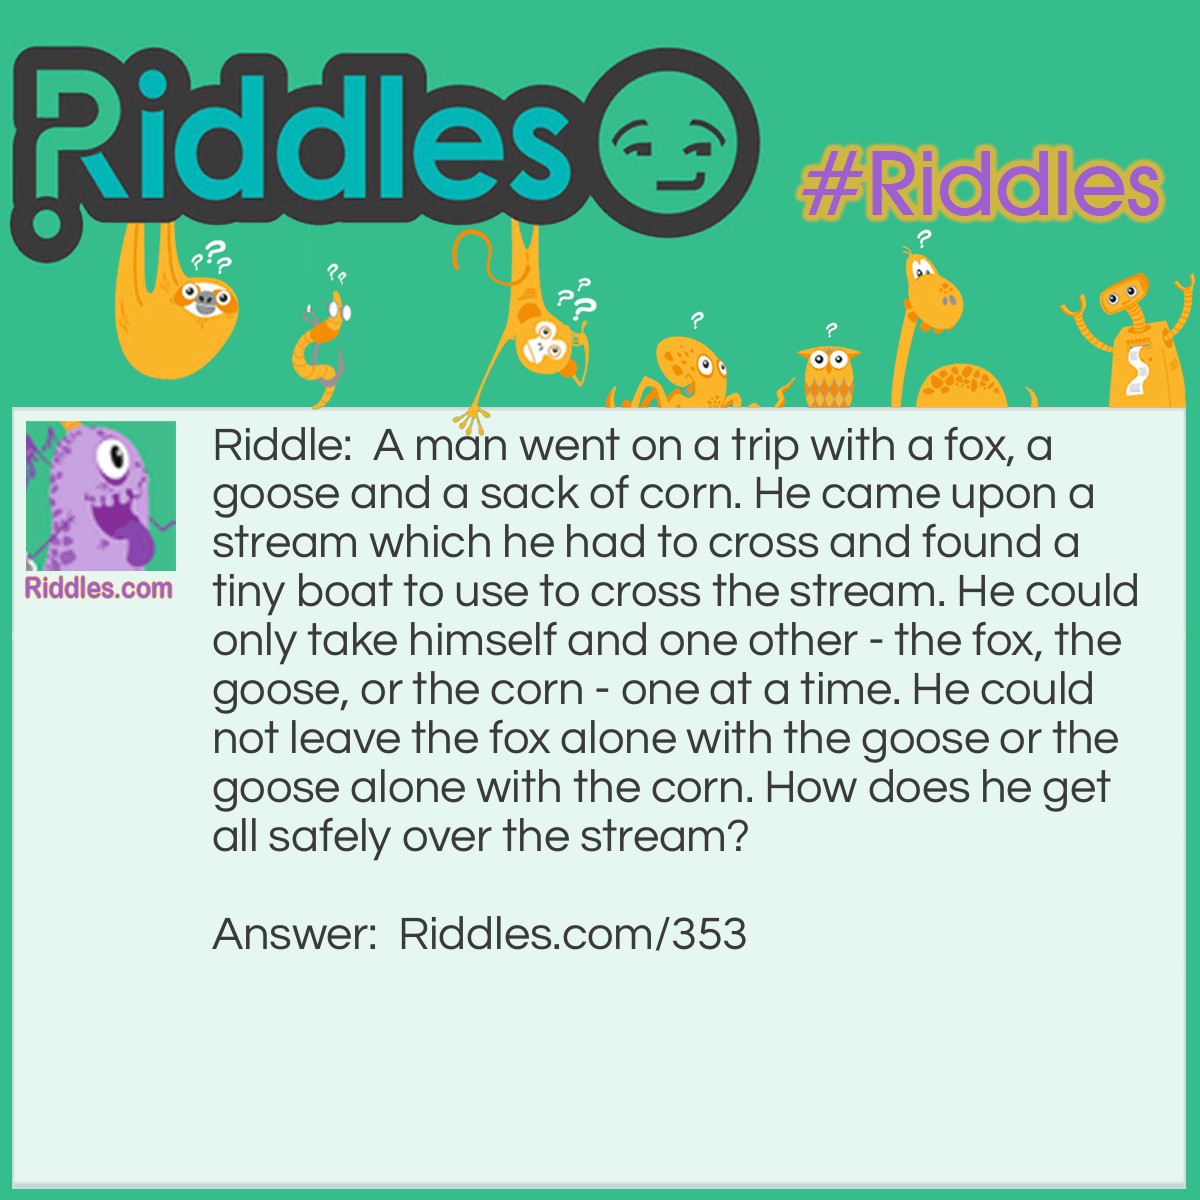 Riddle: A man went on a trip with a fox, a goose and a sack of corn. He came upon a stream which he had to cross and found a tiny boat to use to cross the stream. He could only take himself and one other - the fox, the goose, or the corn - one at a time. He could not leave the fox alone with the goose or the goose alone with the corn. How does he get all safely over the stream? Answer: Take the goose over first and come back. Then take the fox over and bring the goose back. Now take the corn over and come back alone to get the goose. Take the goose over and the job is done!